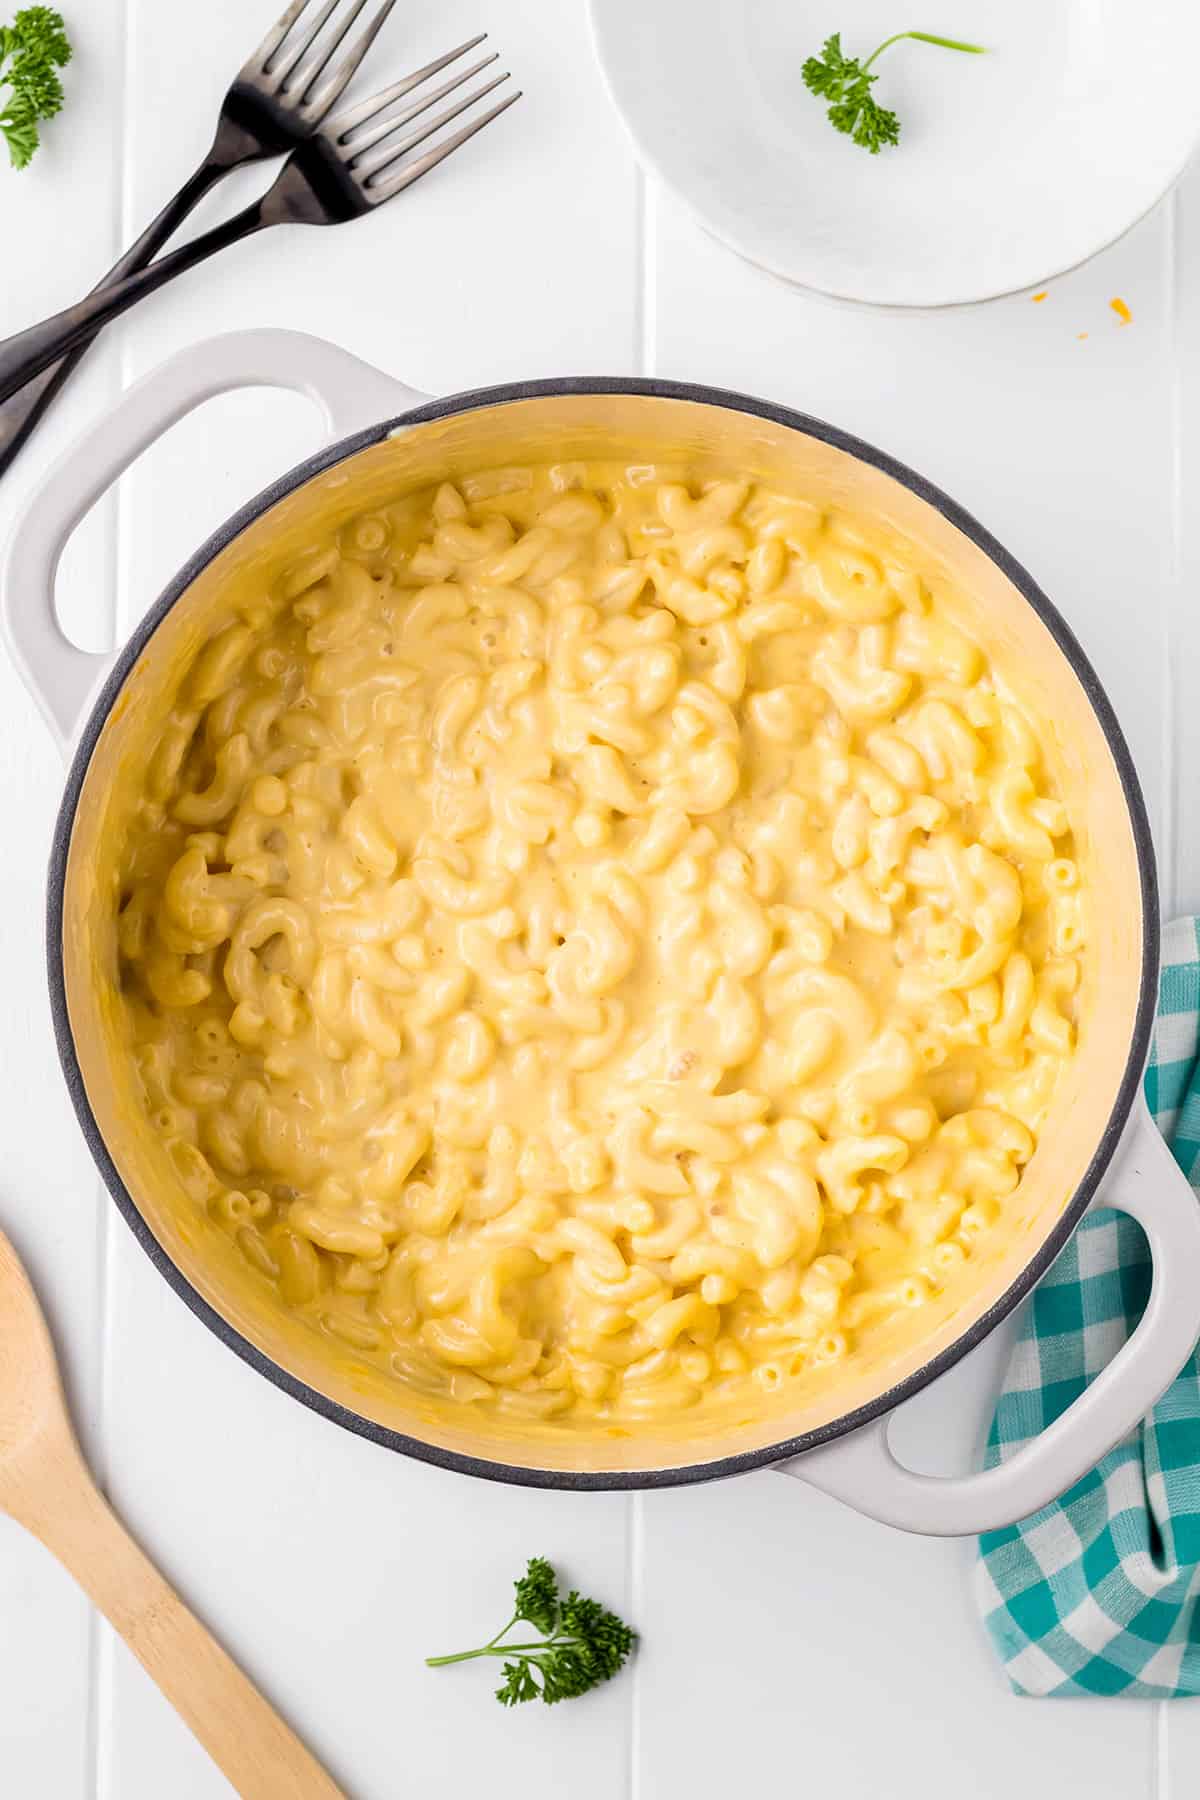 Cheeses and butter fully mixed with the macaroni.